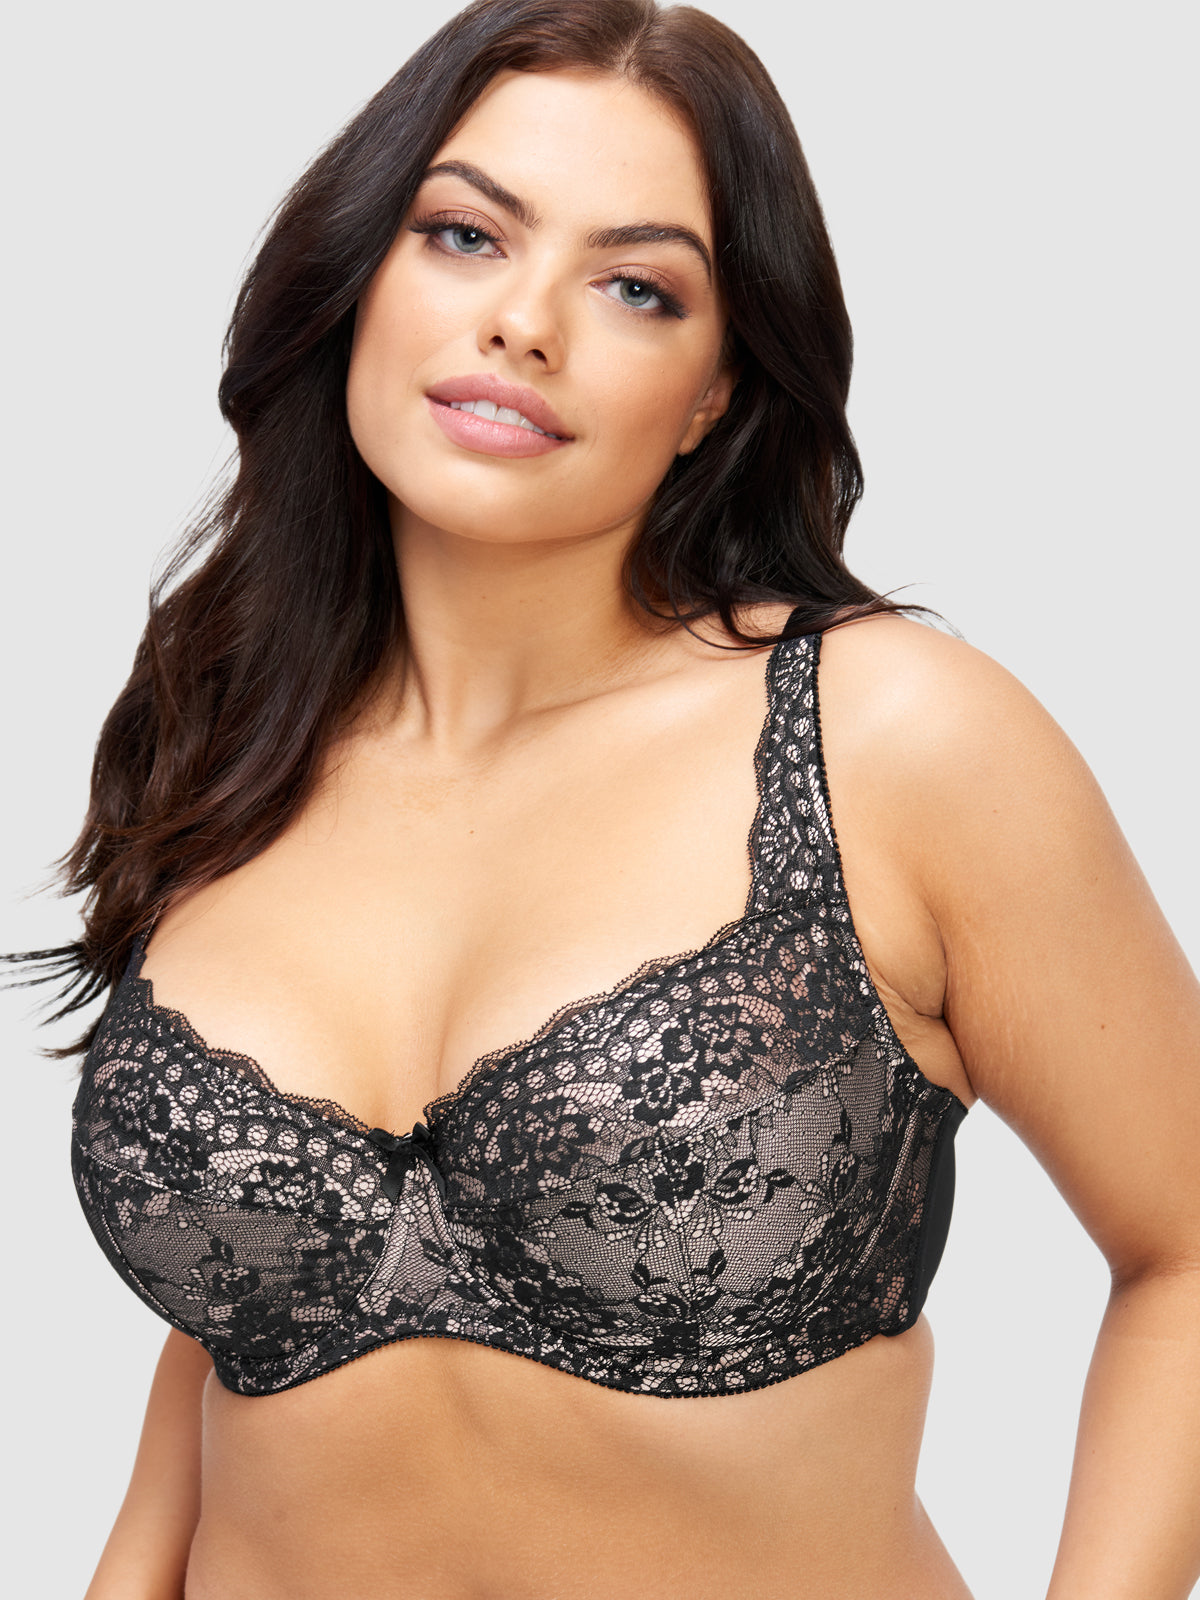 Generic E Cup Bra Plus Size Bustiers and Corsets for Women Push Up